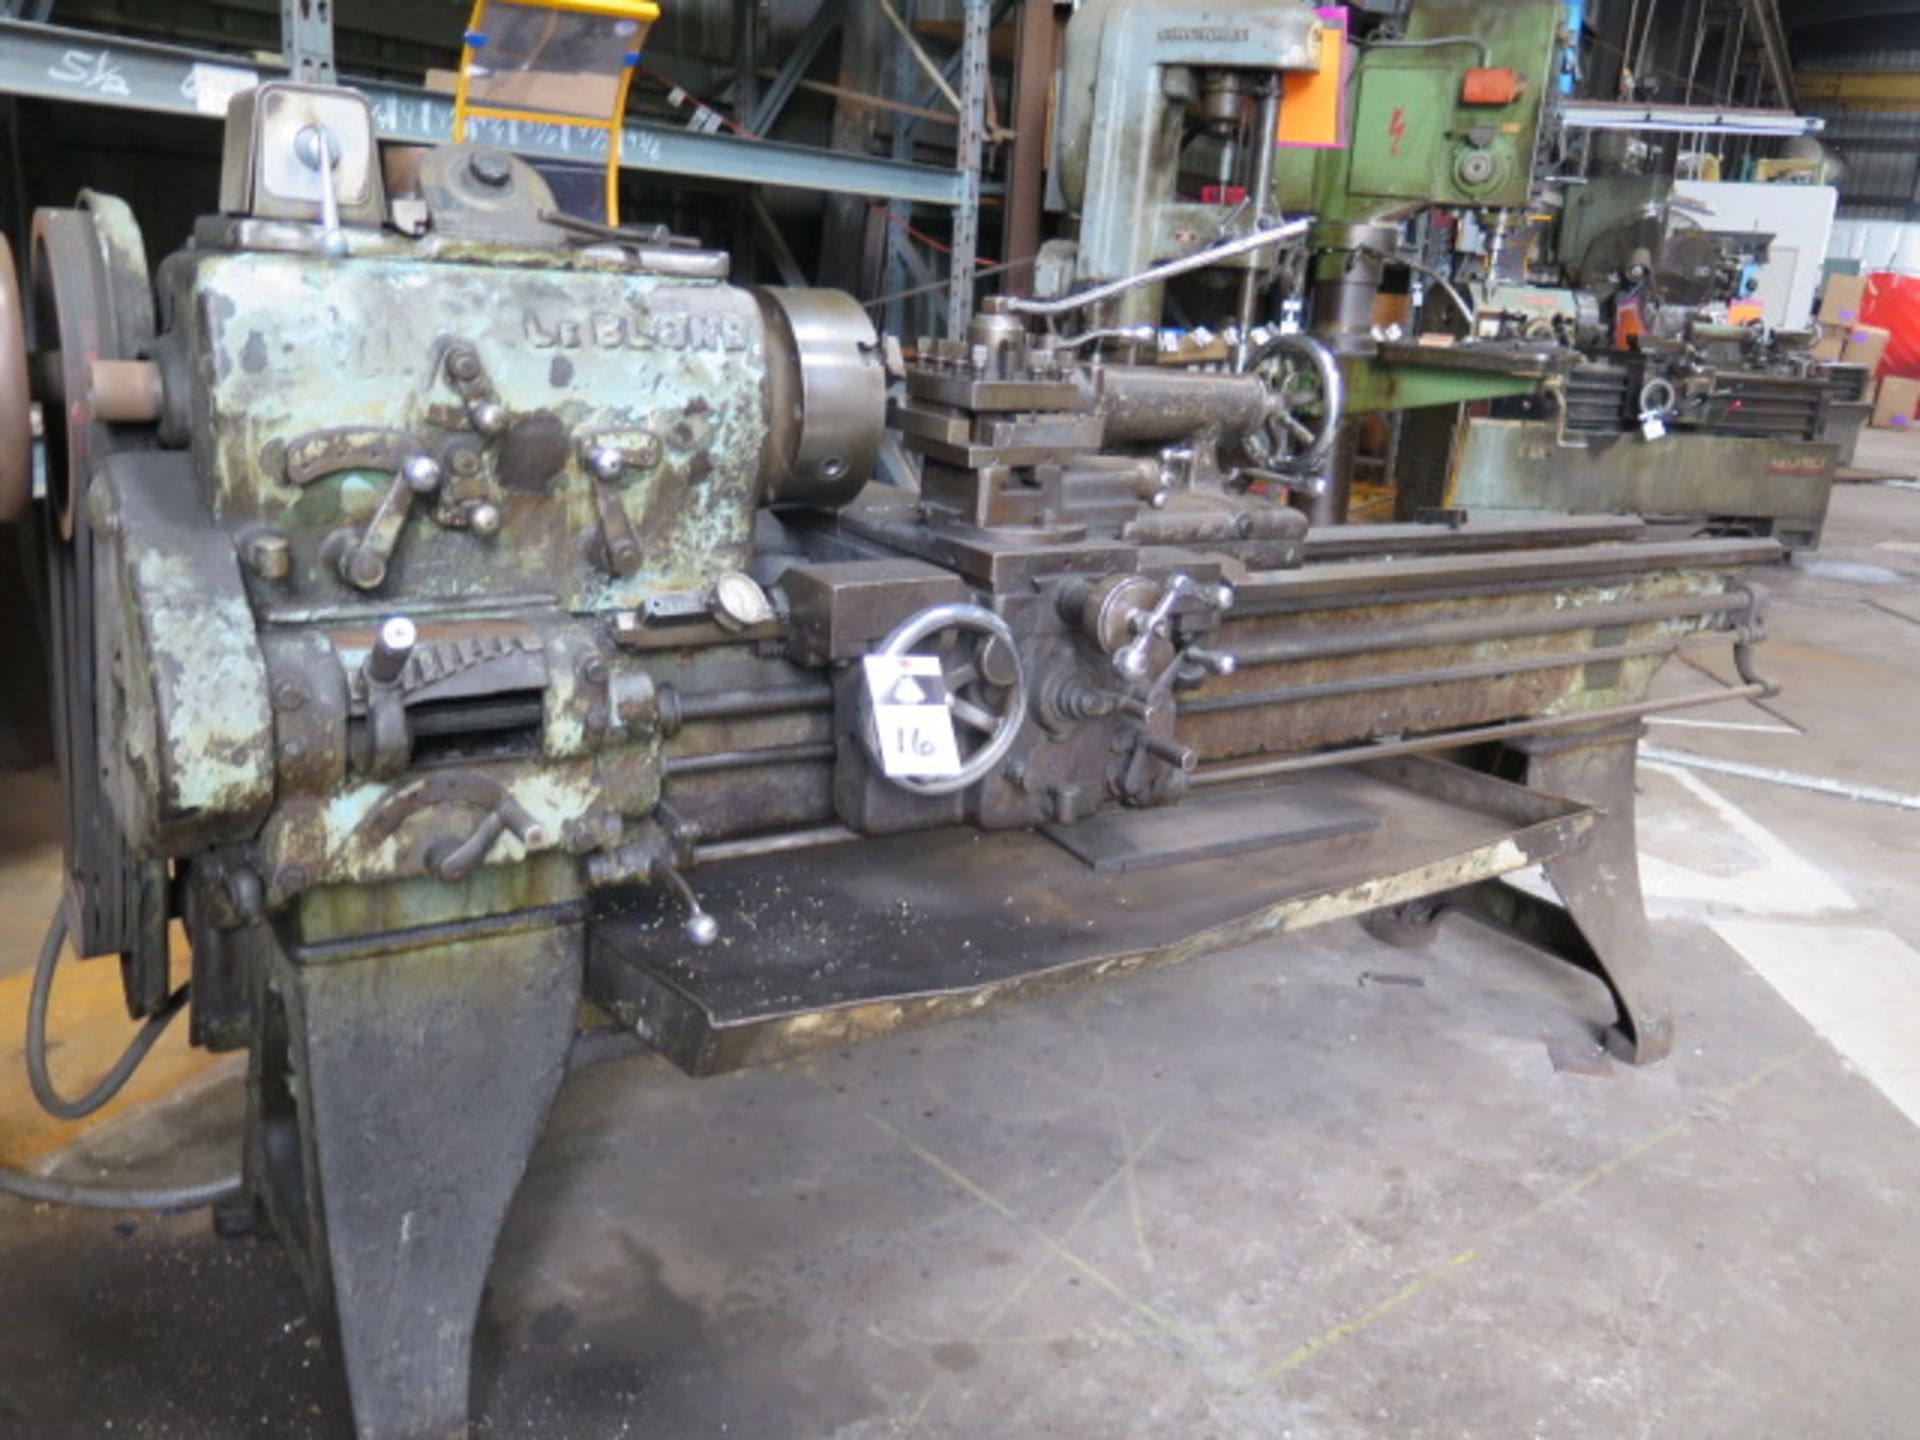 LeBlond 18” x 54” Lathe w/ 10-634 RPM, Inch Threading, Indexing Tool Post, 10” 3-Jaw, SOLD AS IS - Image 2 of 7